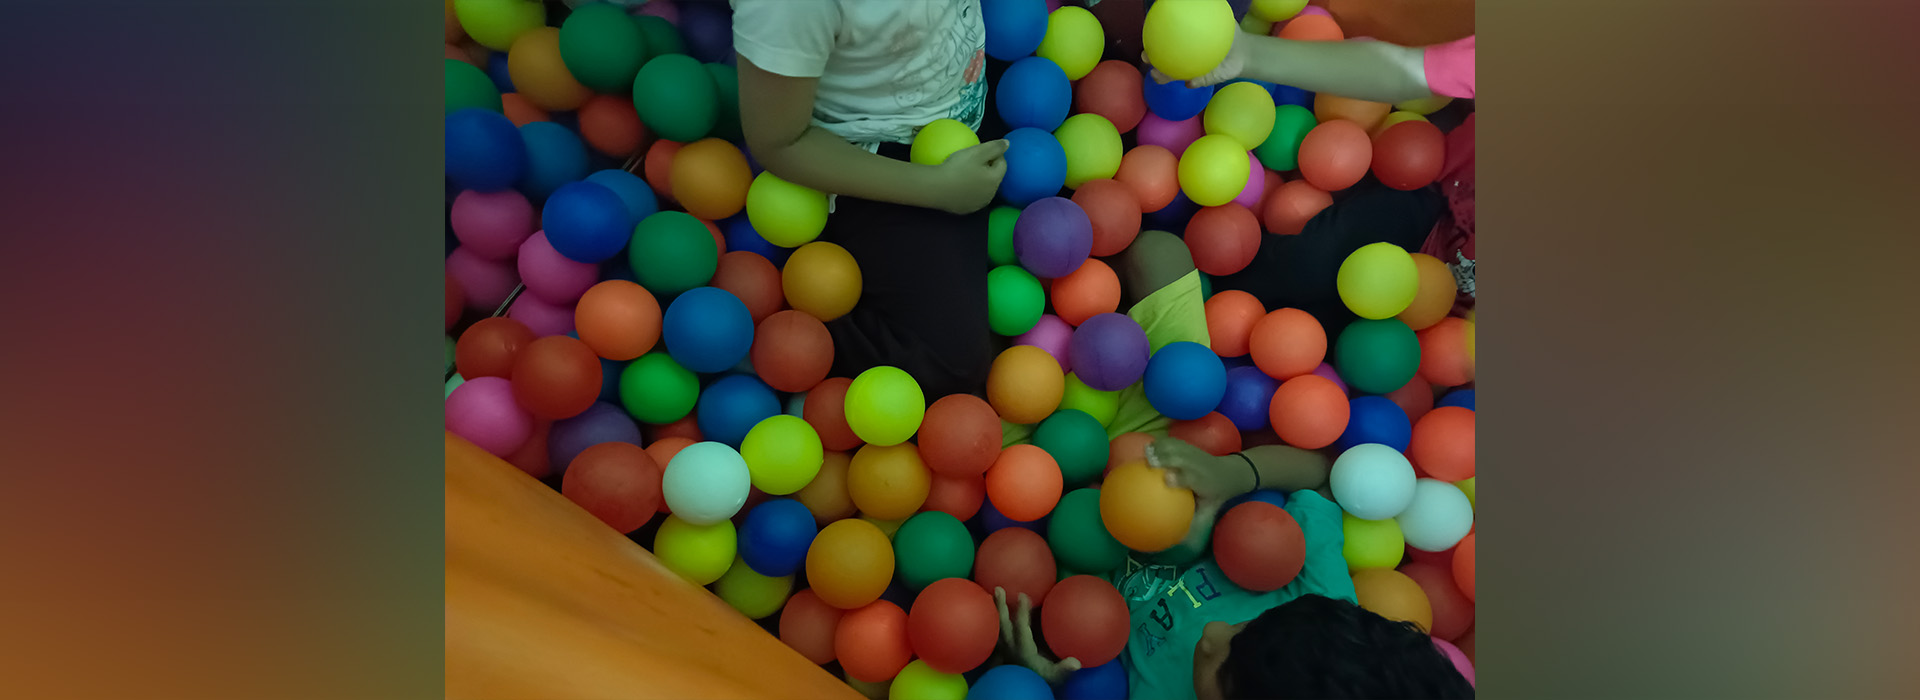 Kids having fun while playing in a ball pit.